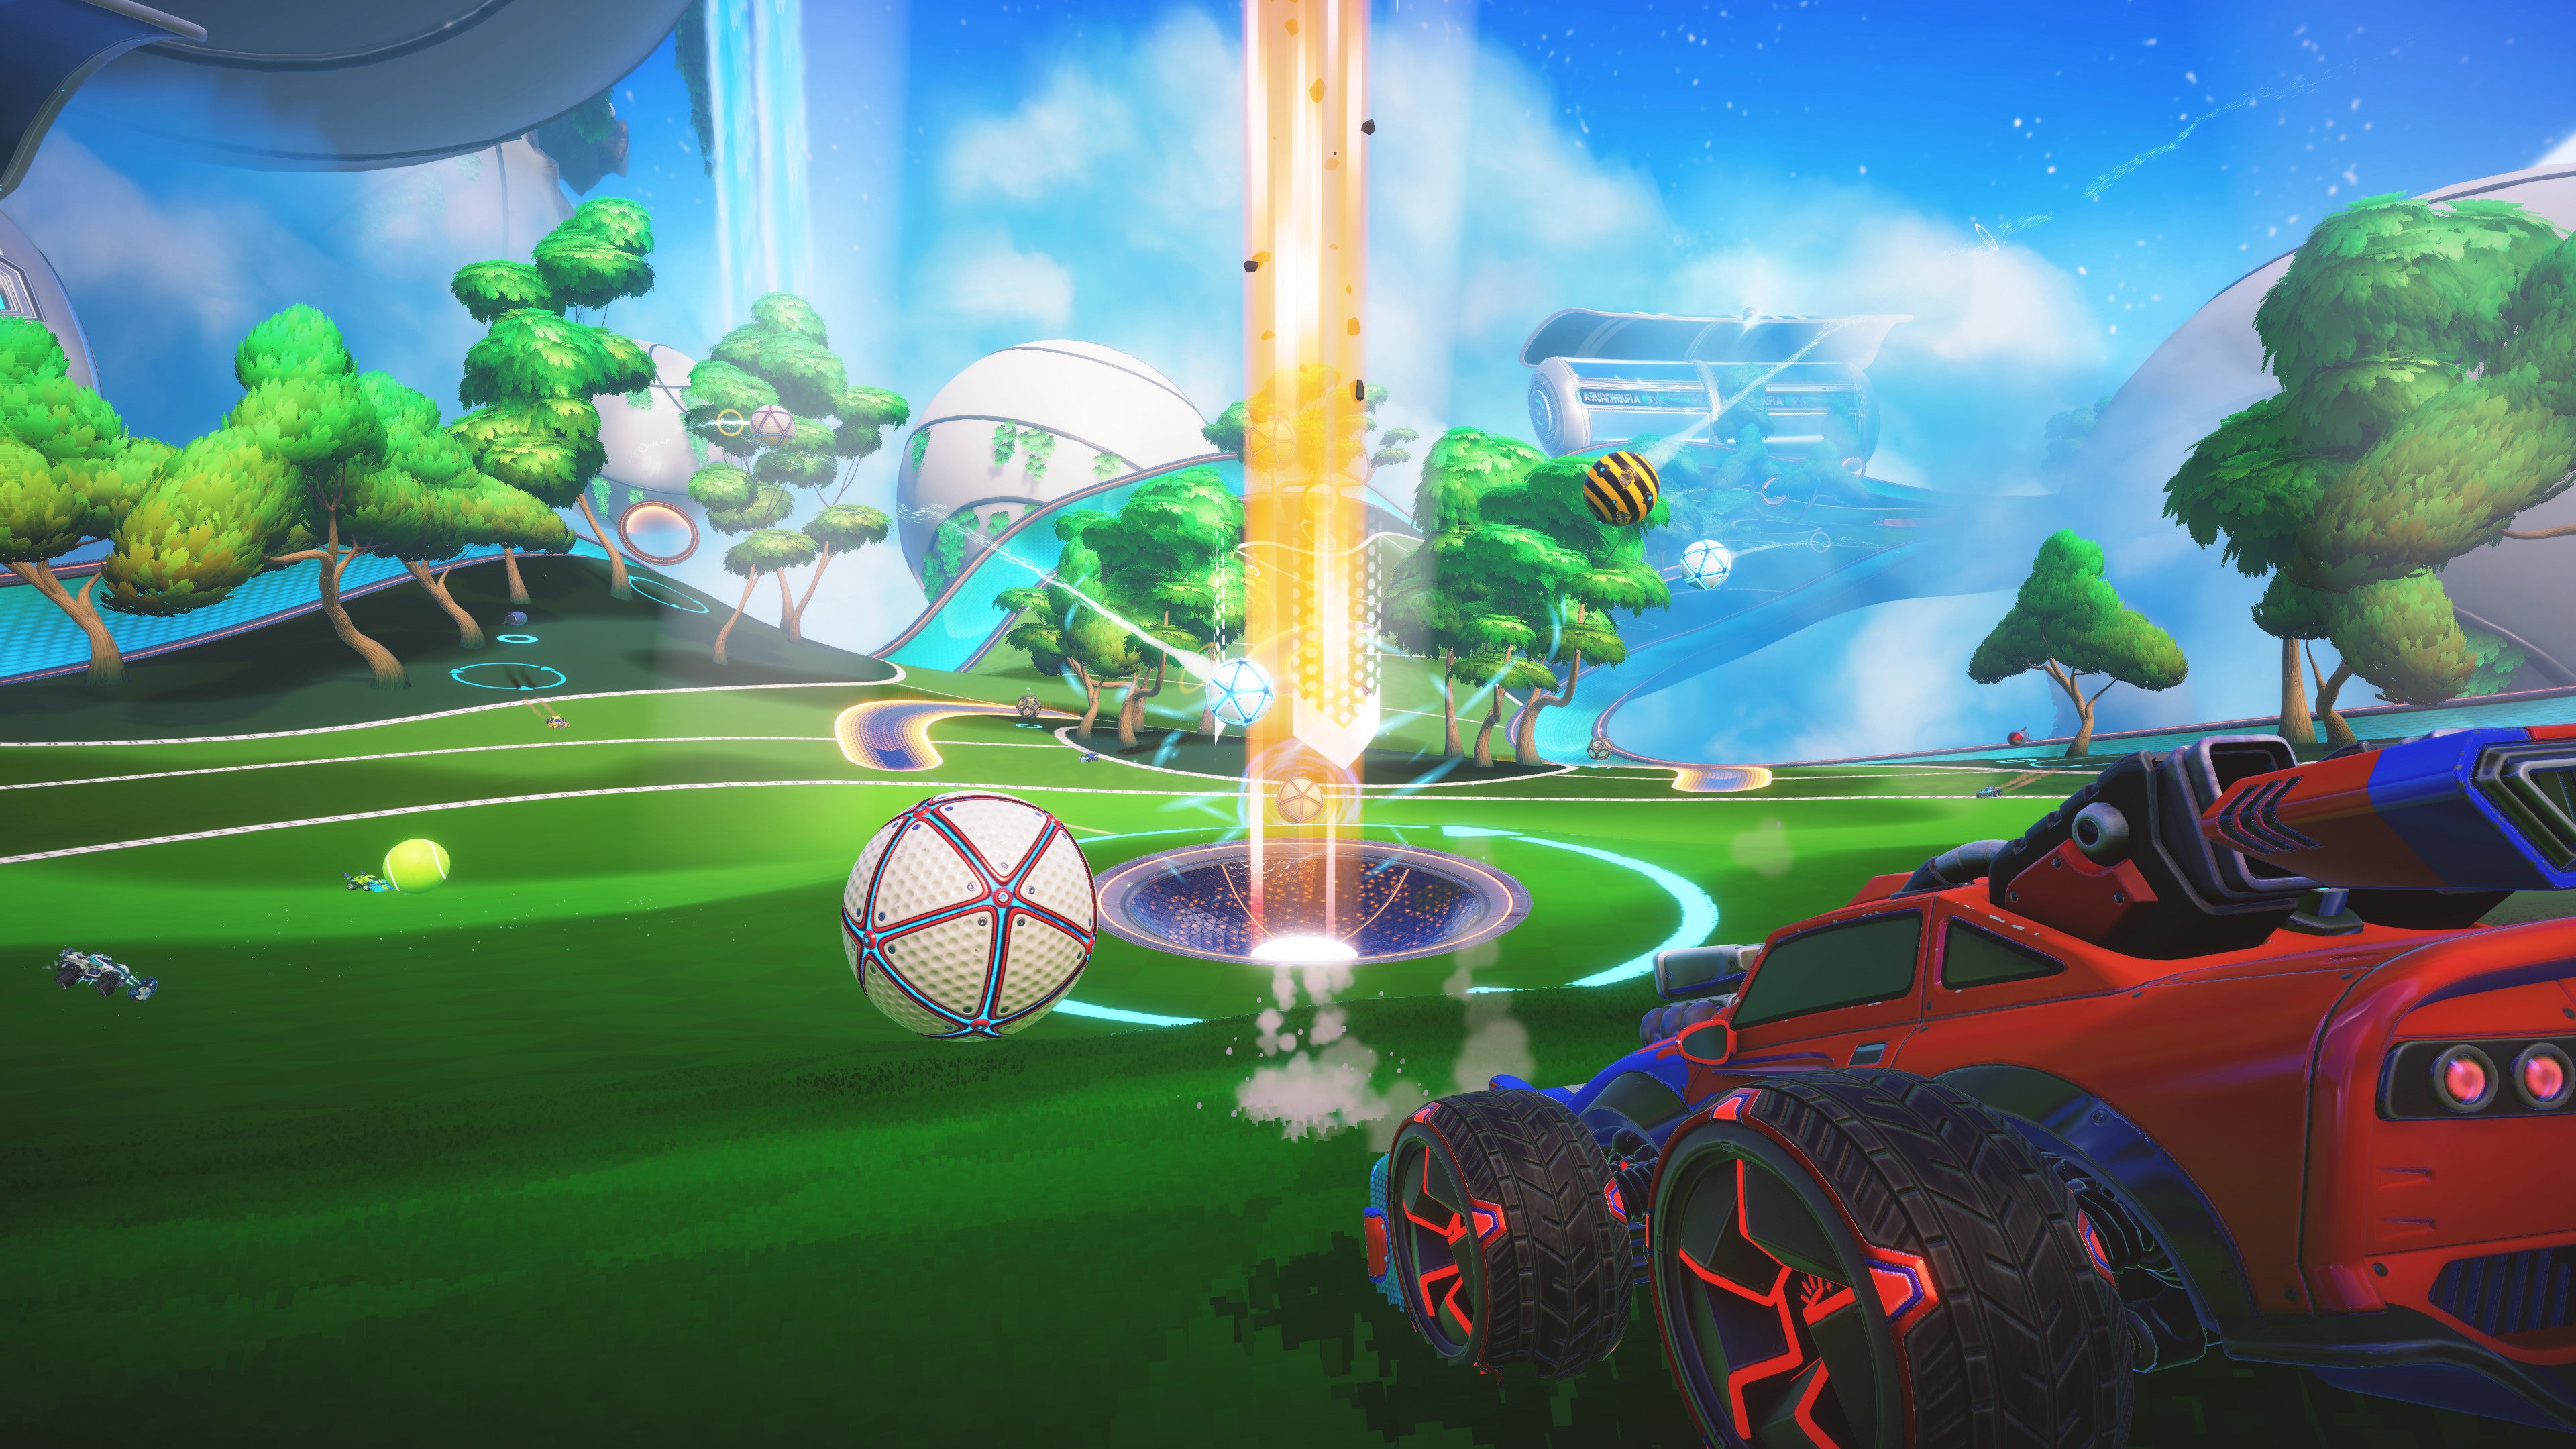 A screenshot of Turbo Golf Racing, showing a car on a floating green golf course racing towards a giant ball.